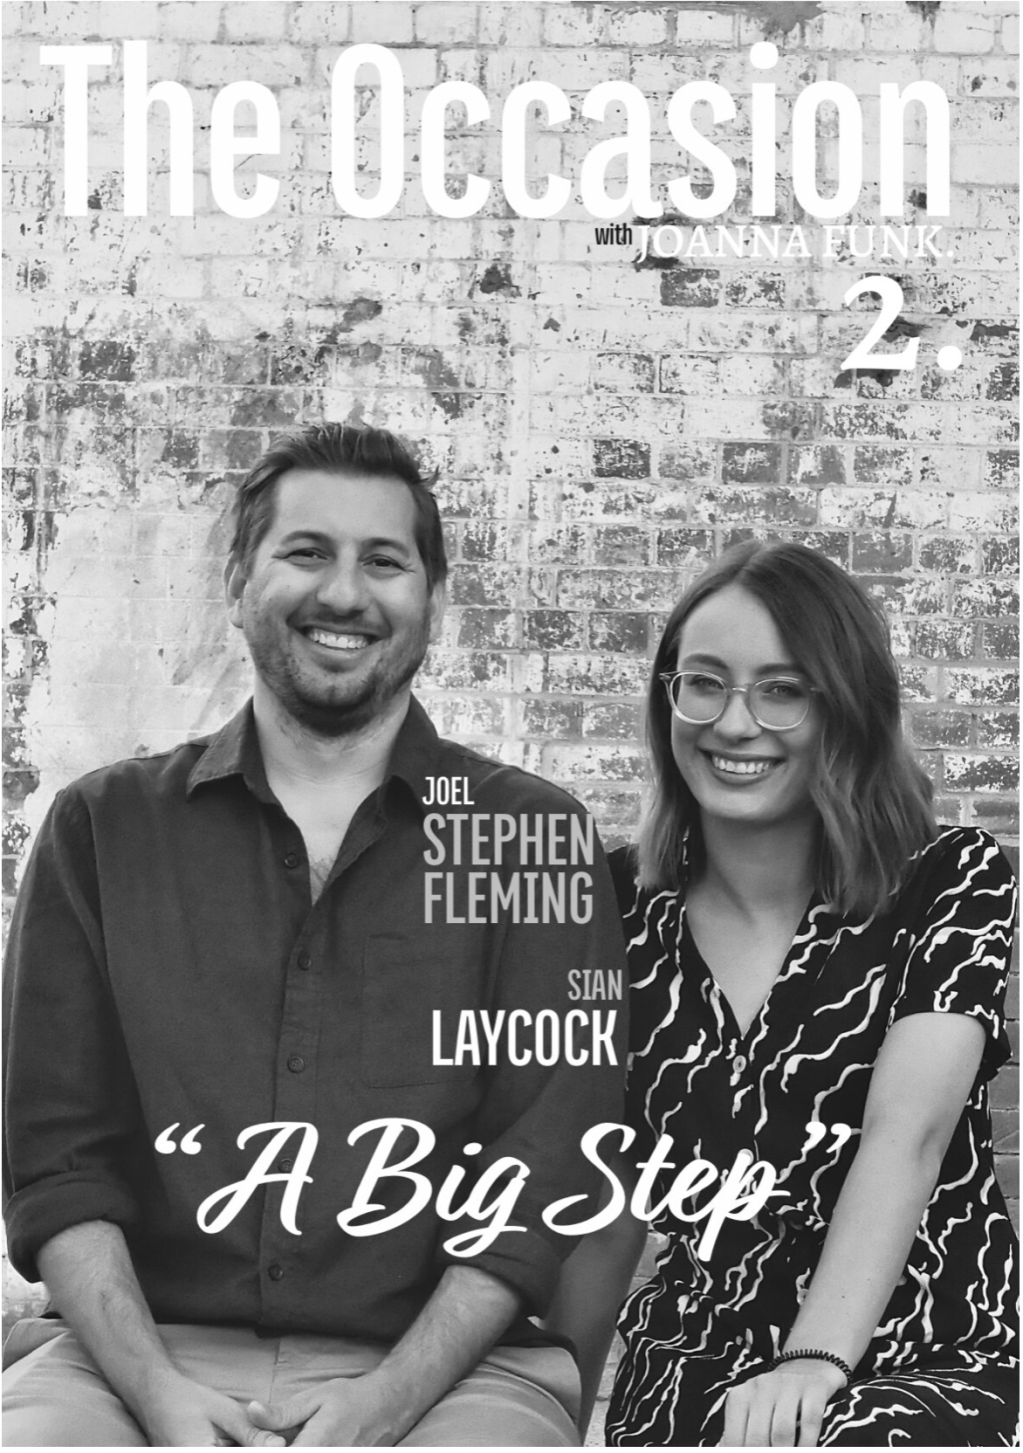 The Occasion #2 — Sian Laycock & Joel Stephen Fleming